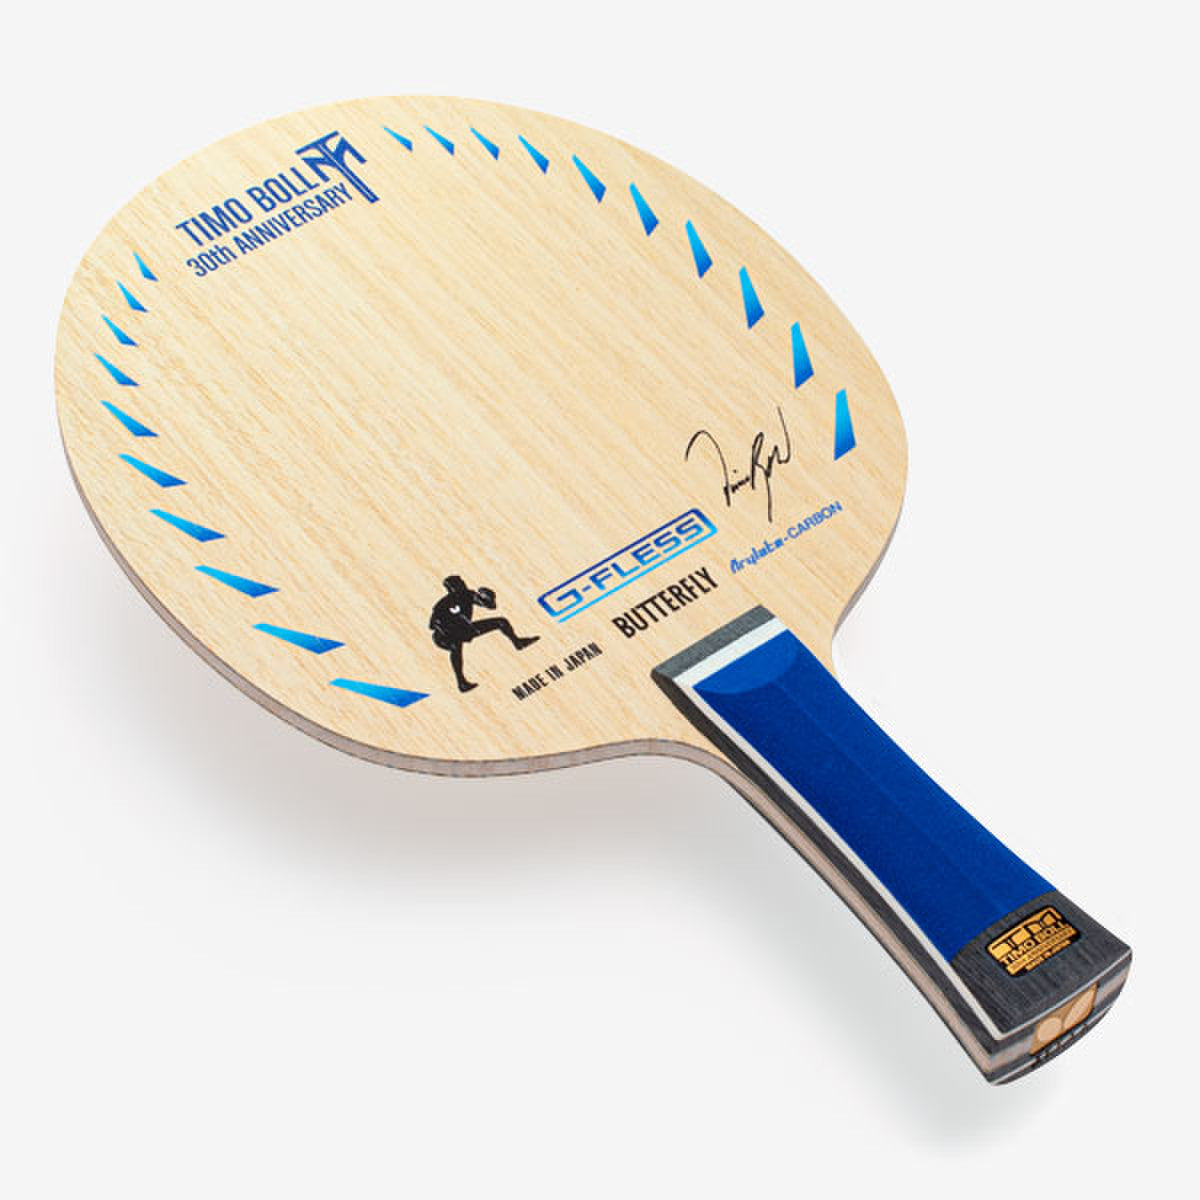 Butterfly Timo Boll 30th Anniversary Edition - Offensive Table Tennis Blade